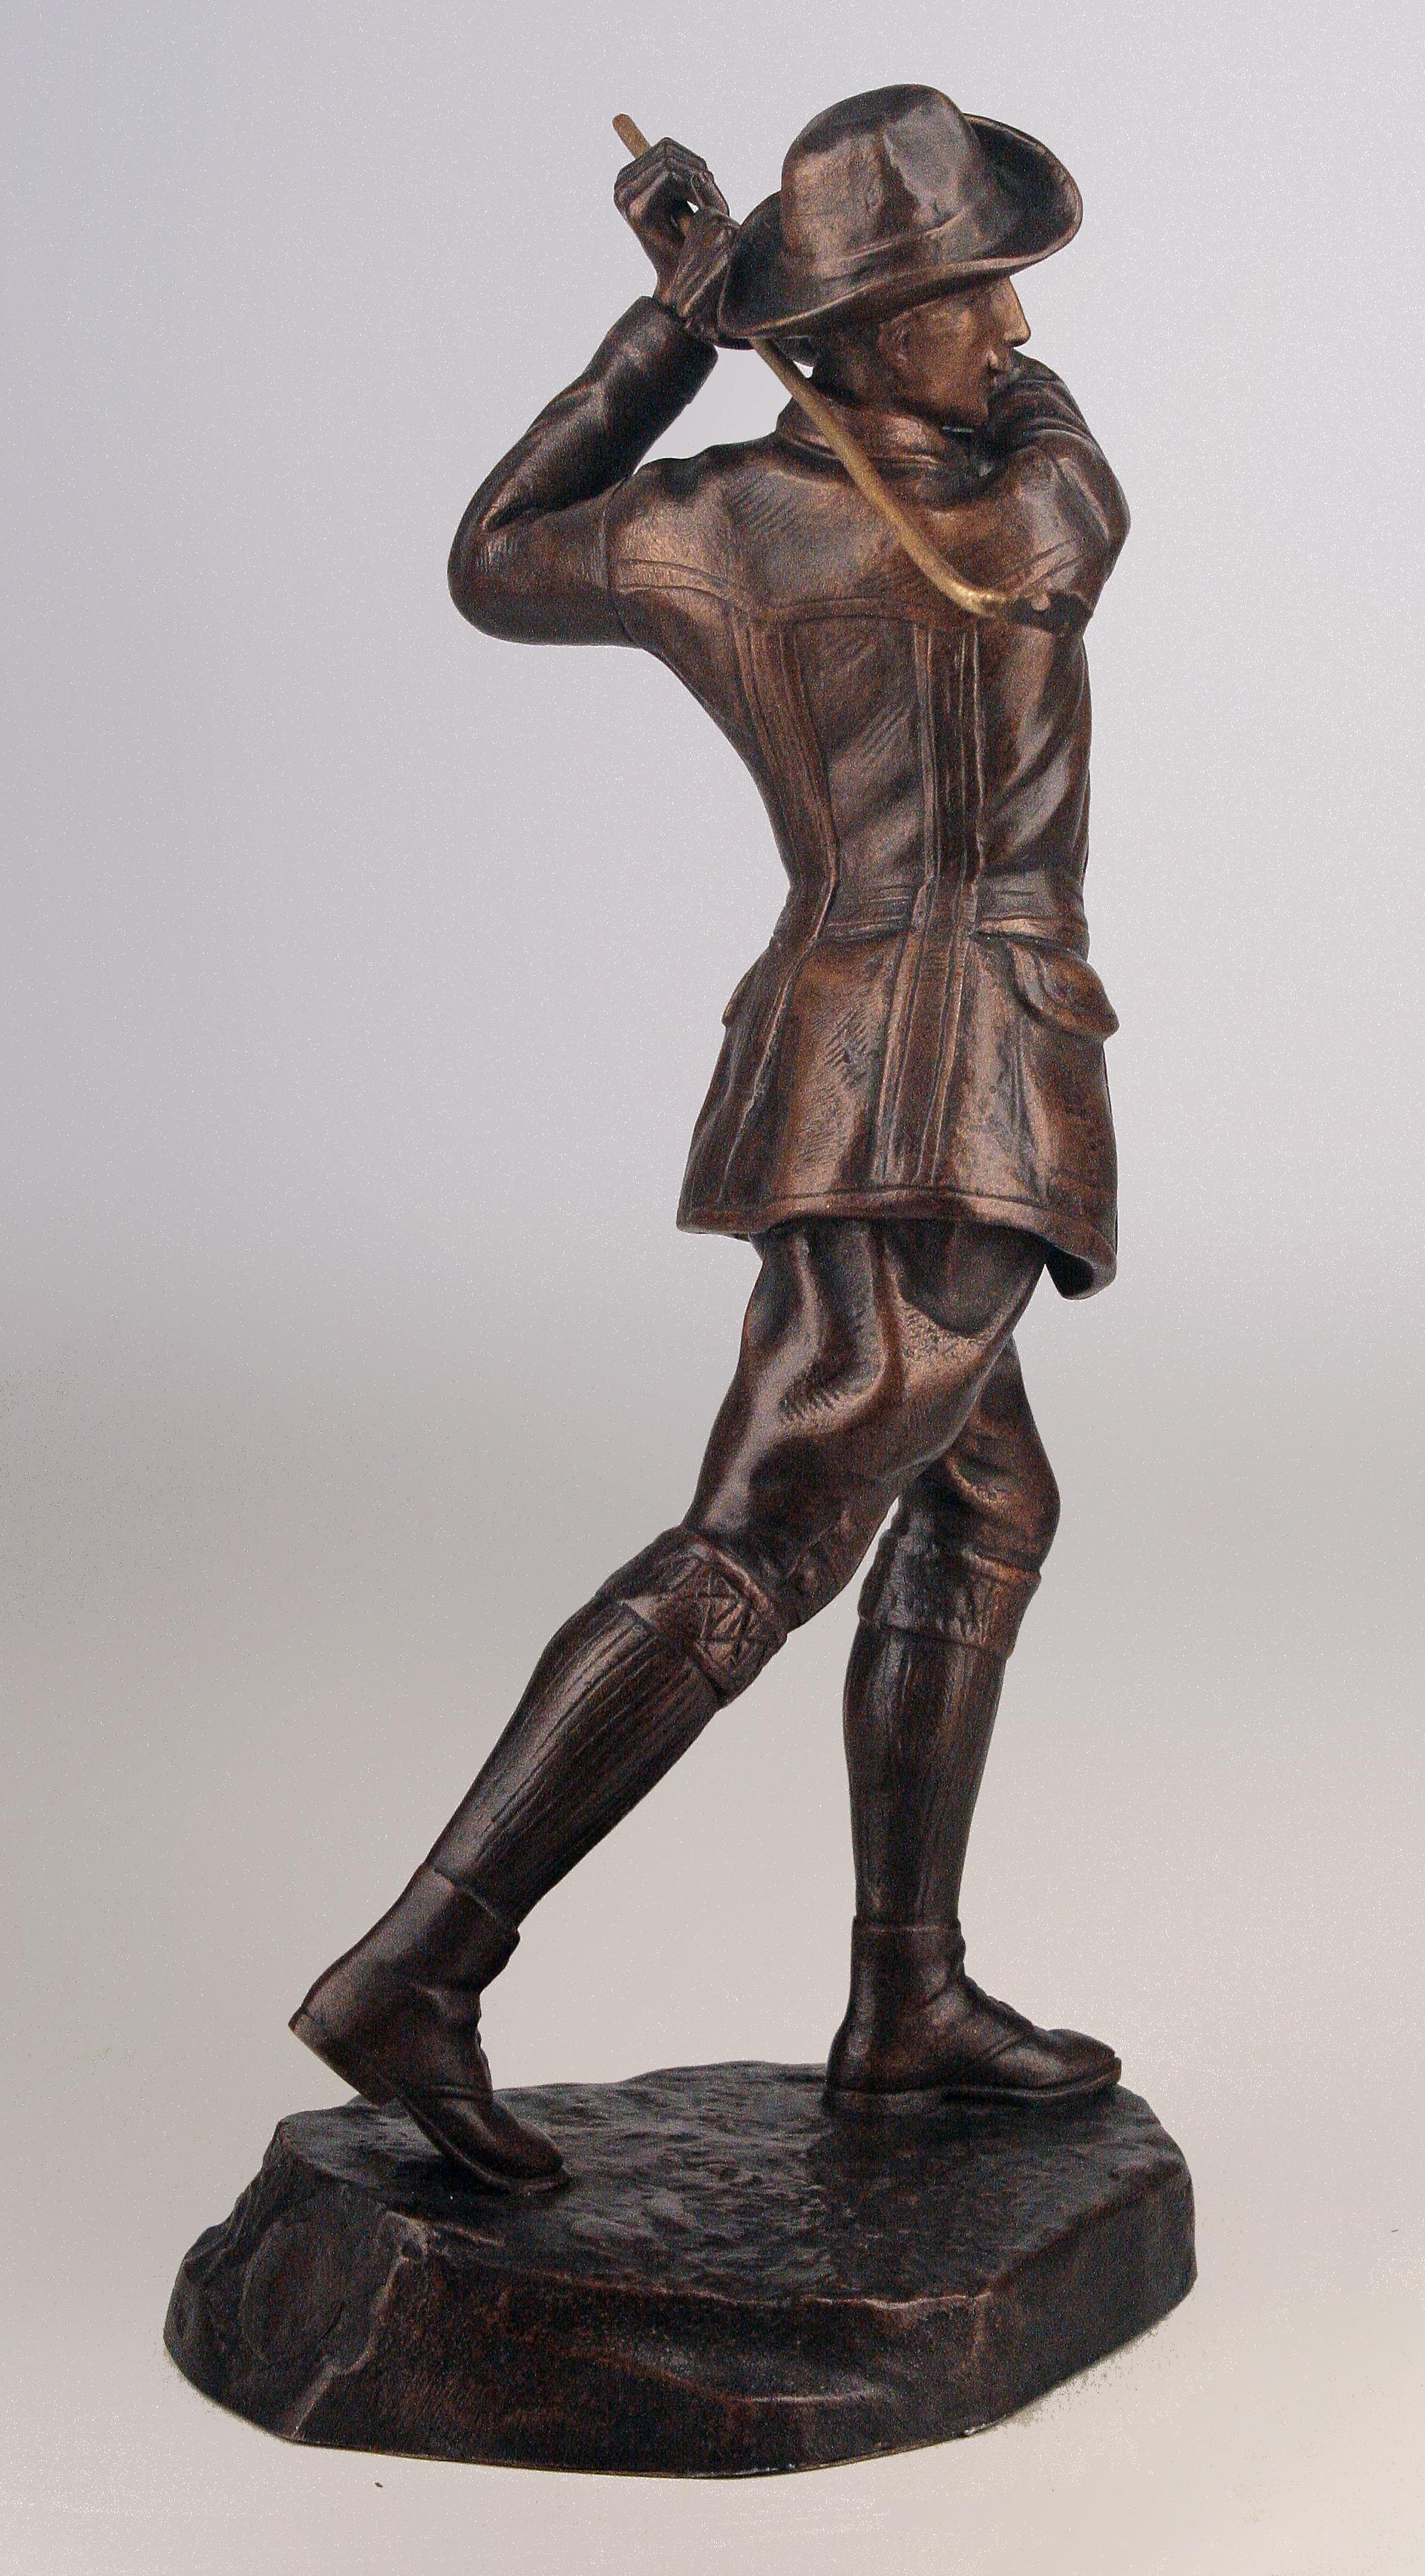 Bronze golfer sculpture
Gentelman Golfer
bronze material with brown patina
Very good general condition
Natural wear and tear over time
Attributed P. Vannier
Paul Vannier French sculptor and medalist (1880-1940)
It has a stamp from the importer (Casa